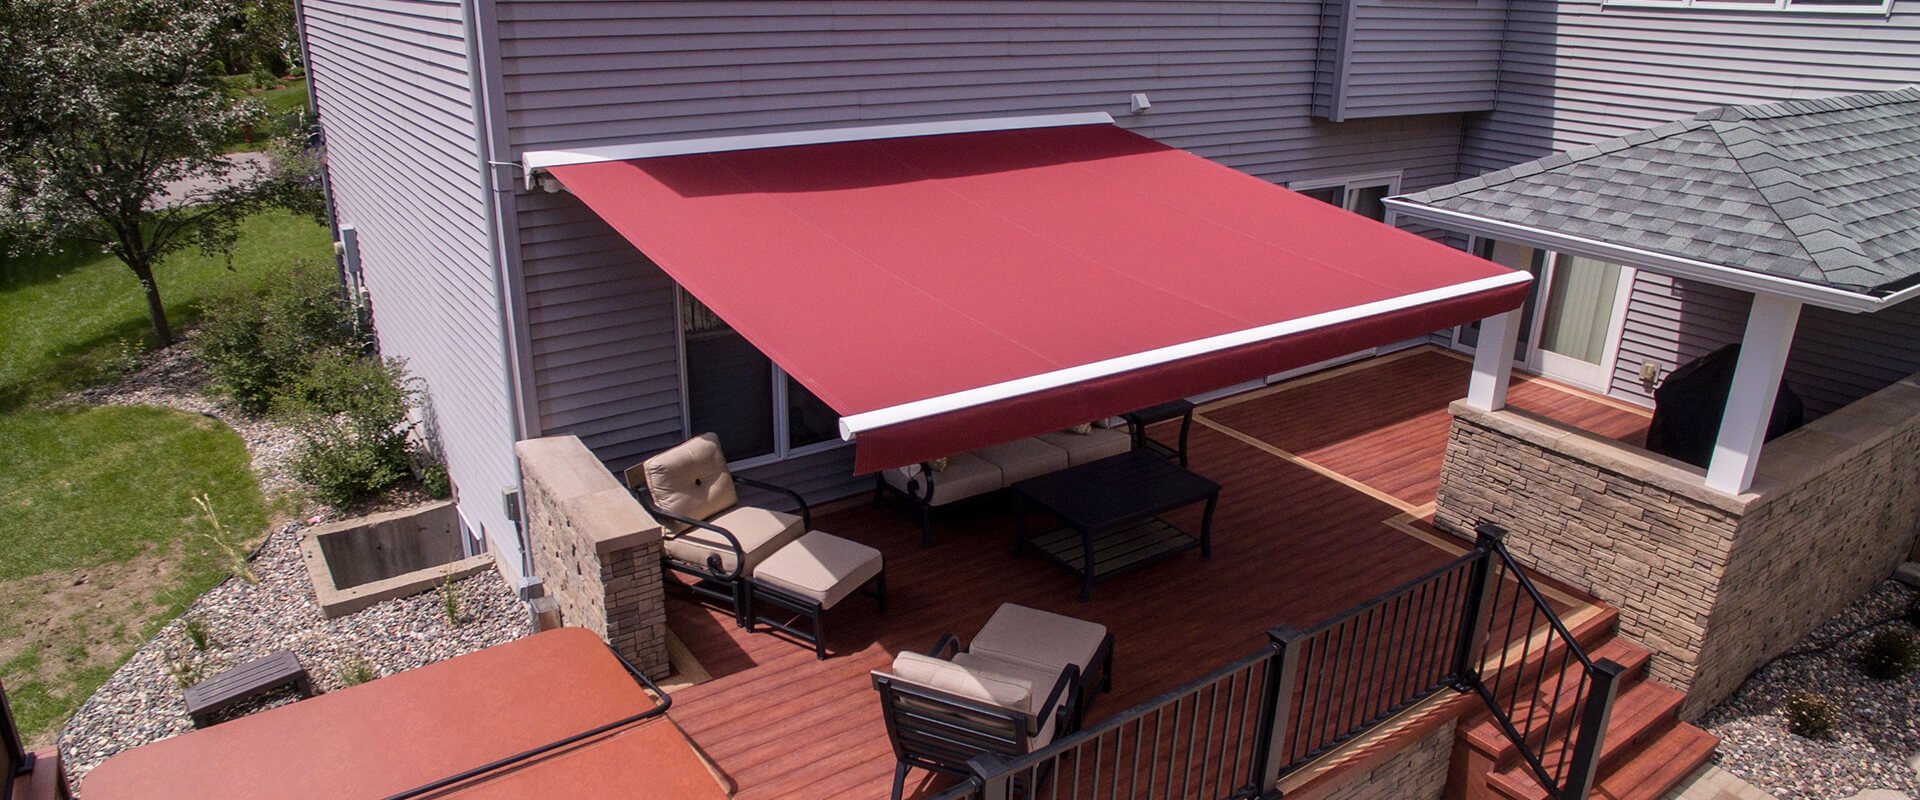 Save on Energy Bills with Awnings and Solar Screens